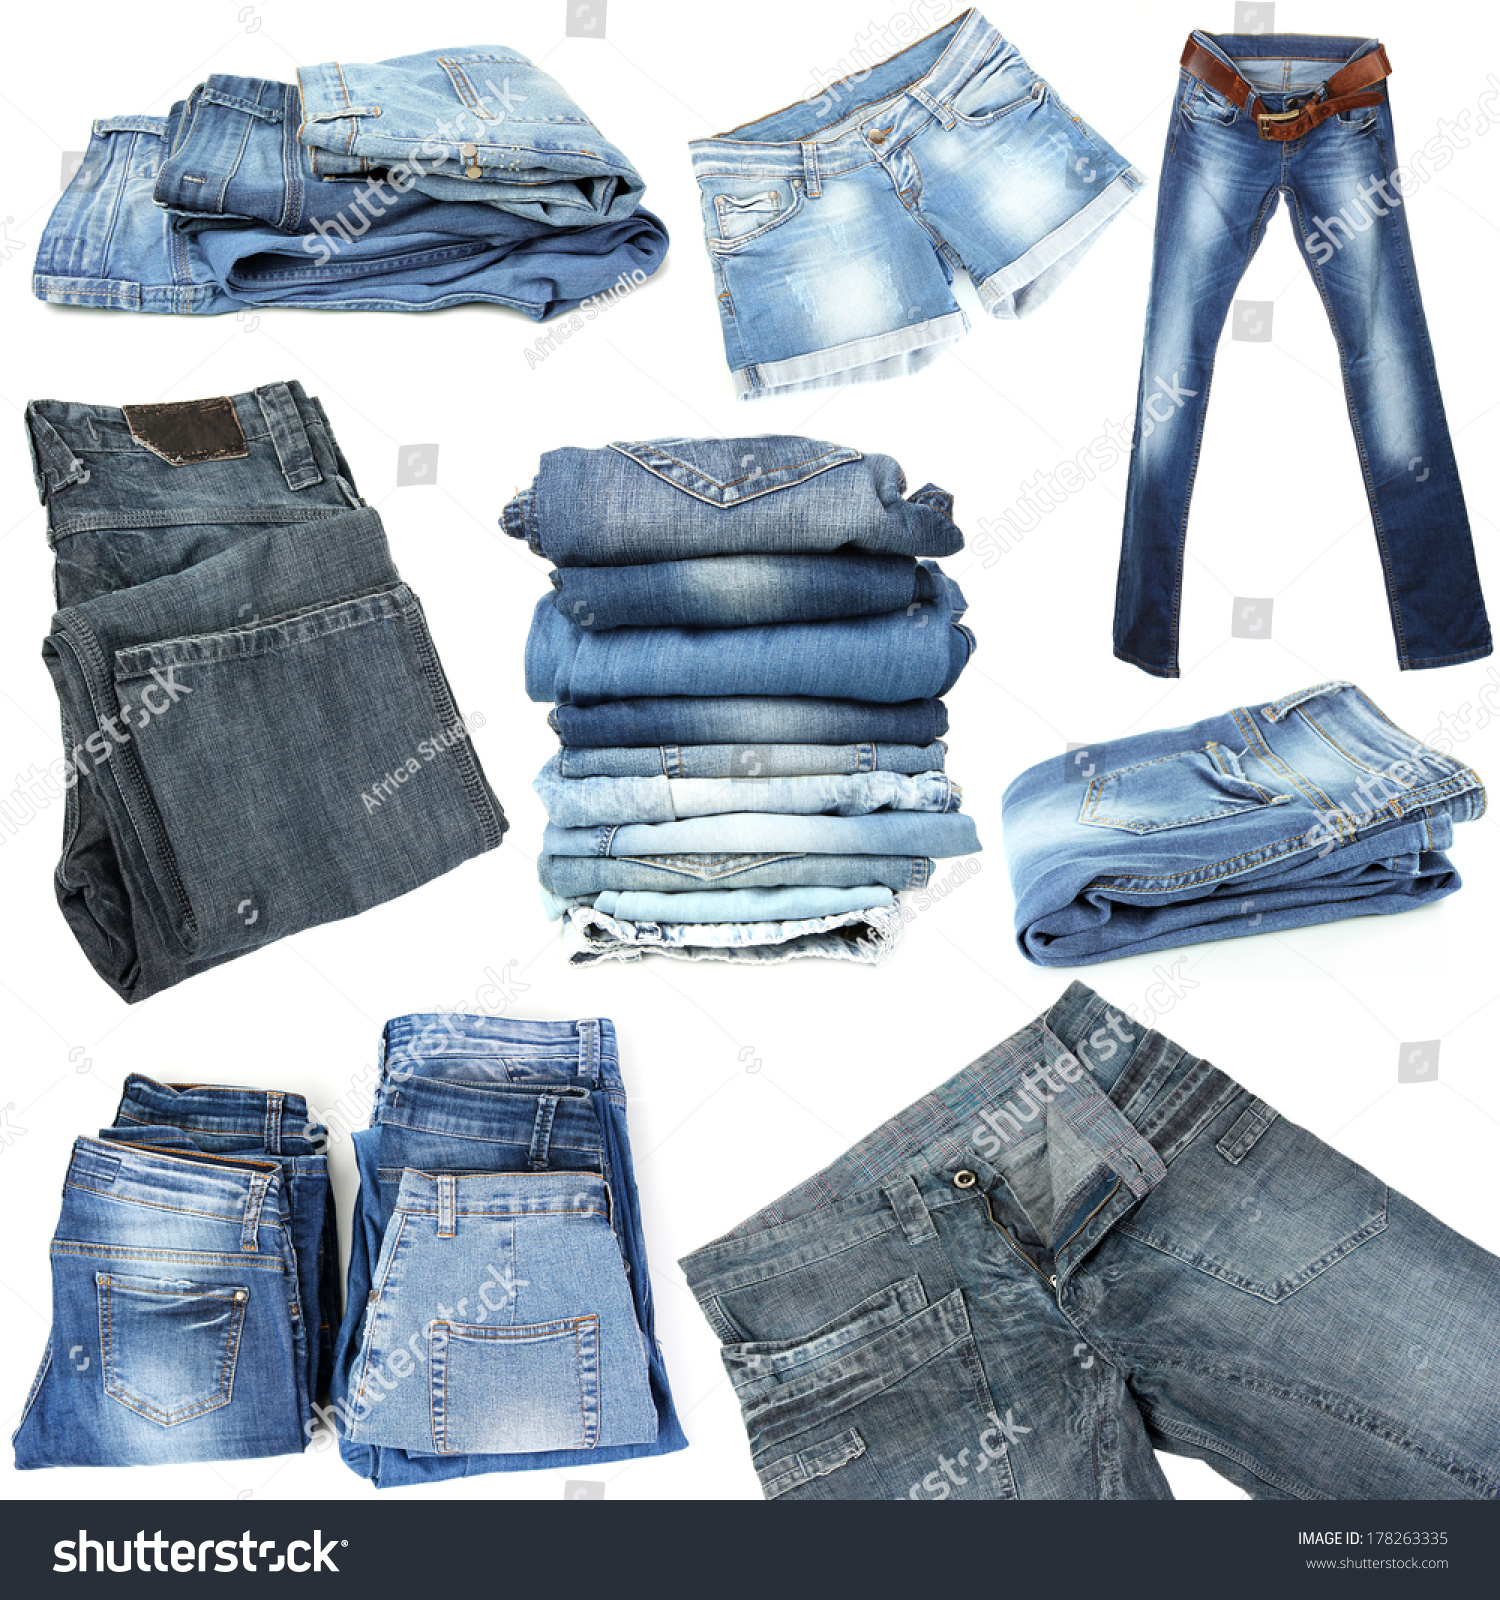 Collage Of Jeans Isolated On White Stock Photo 178263335 : Shutterstock